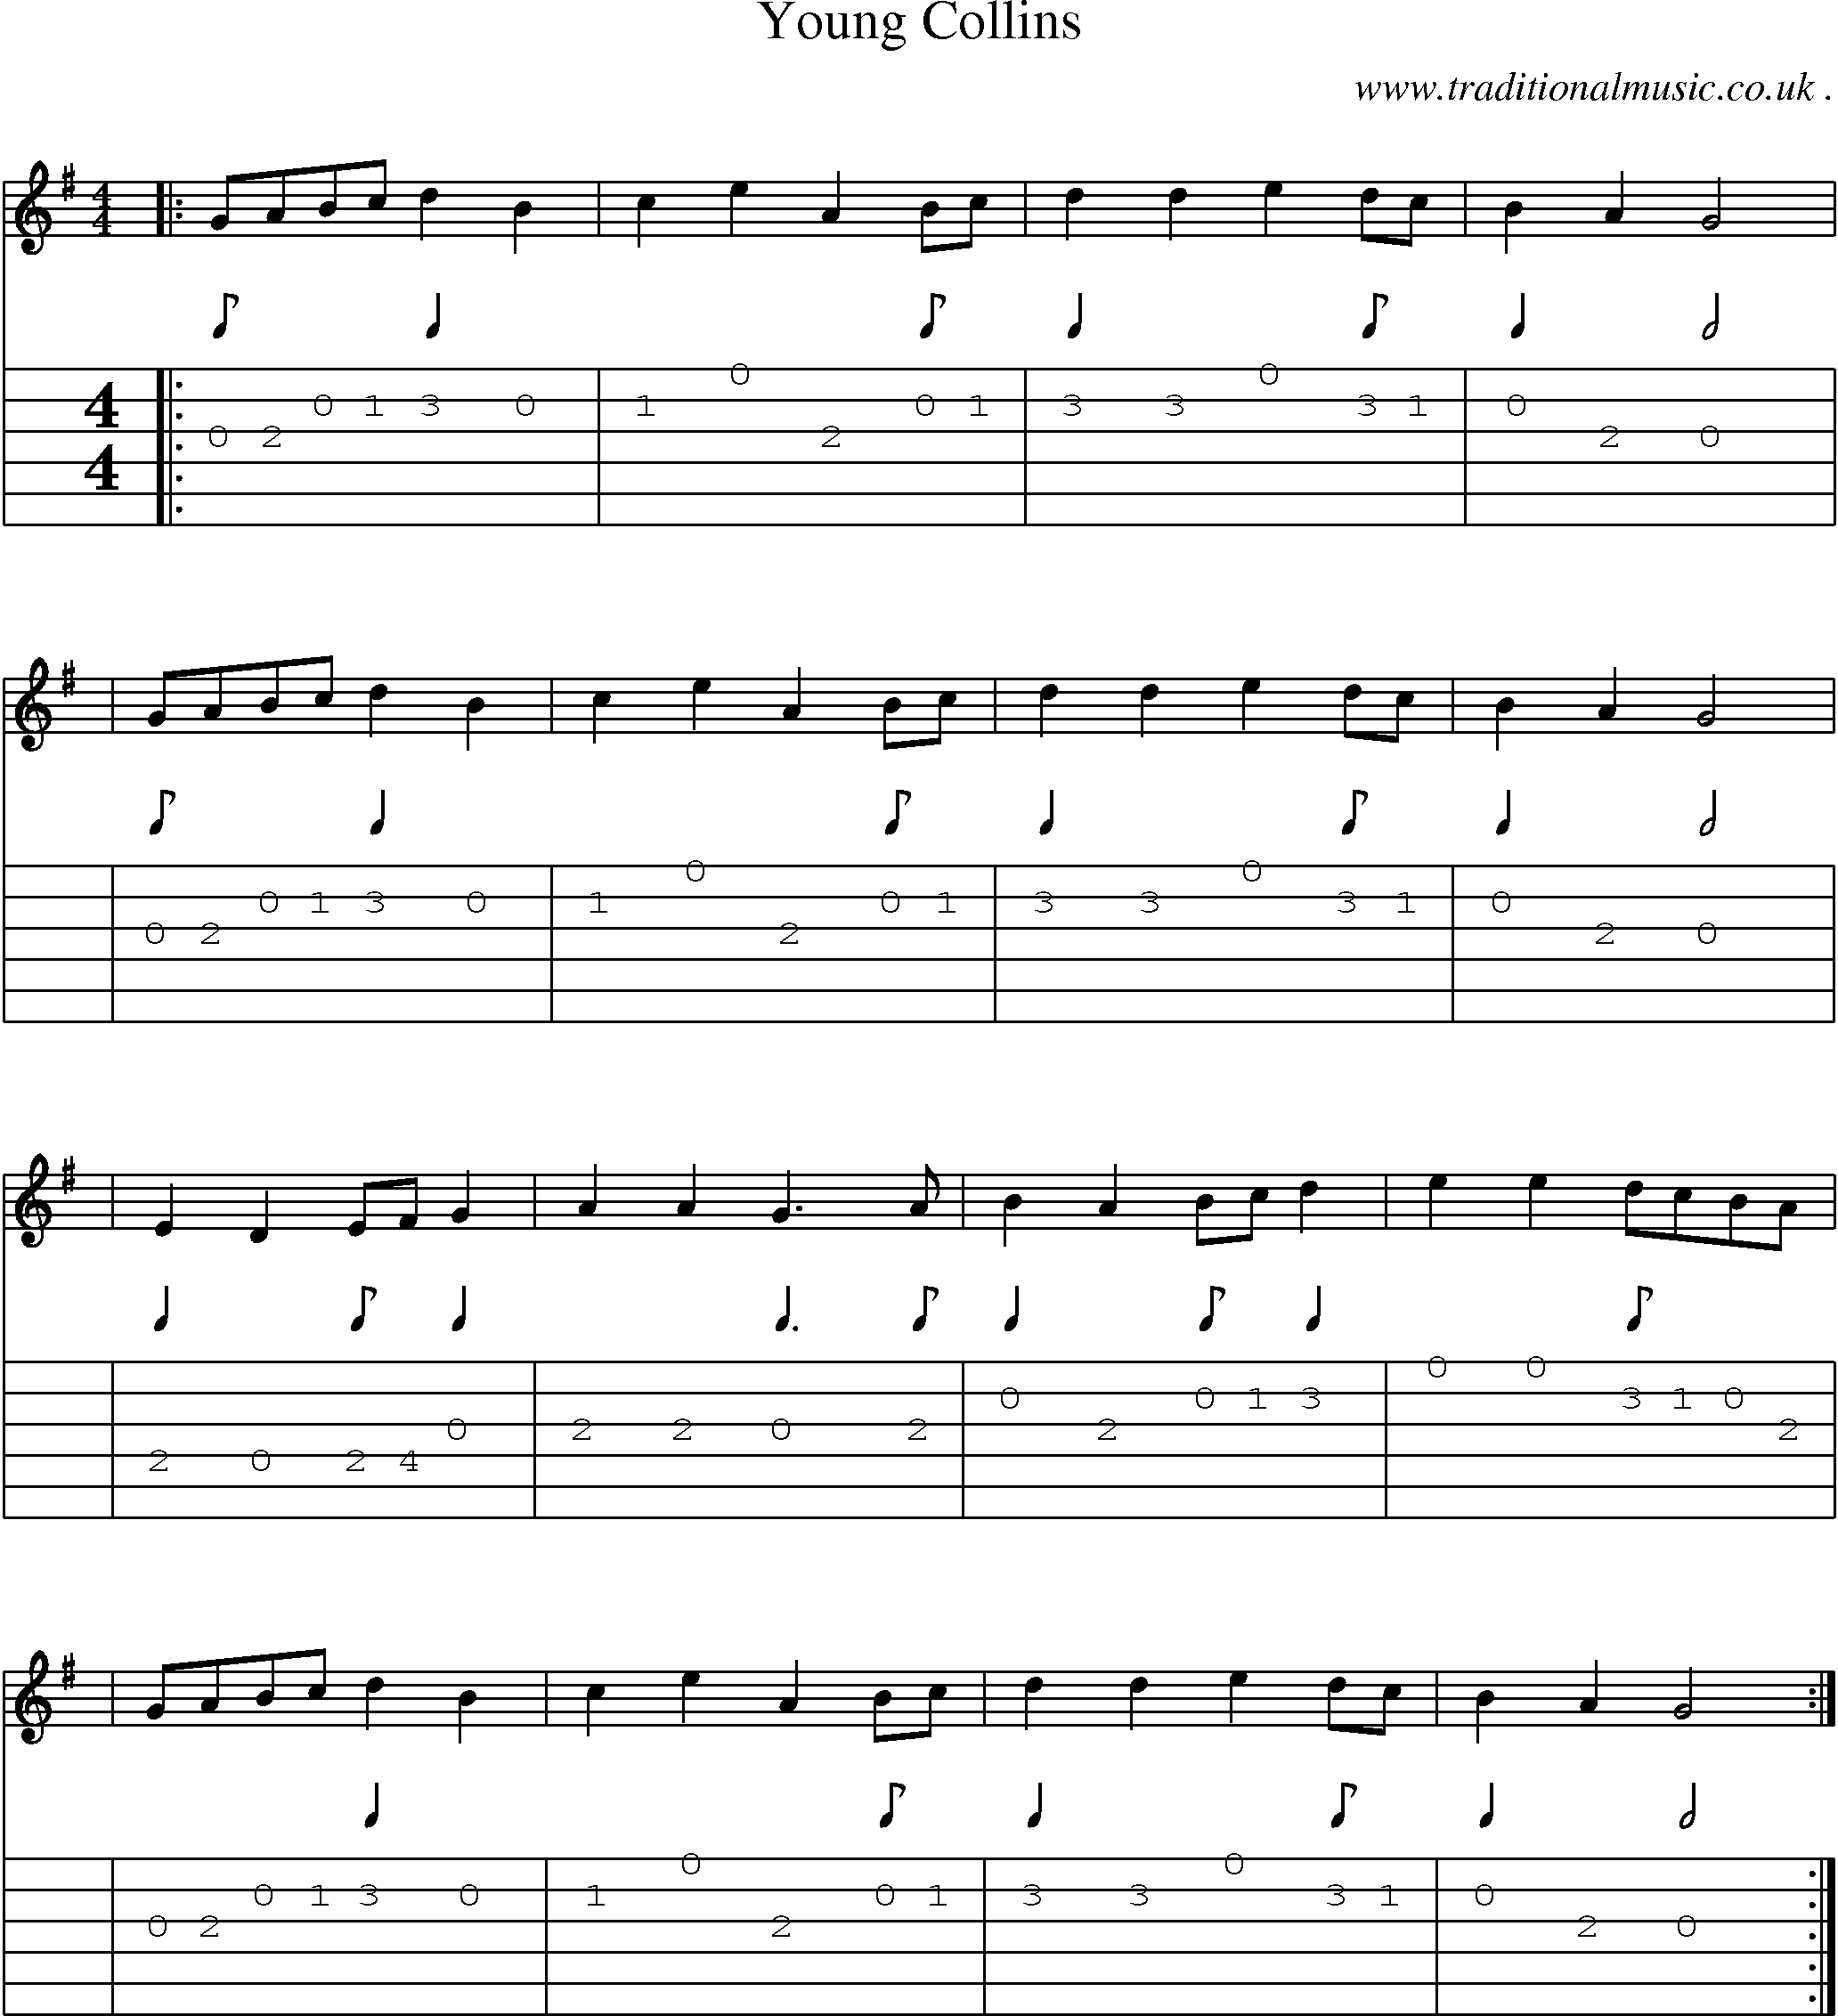 Sheet-Music and Guitar Tabs for Young Collins